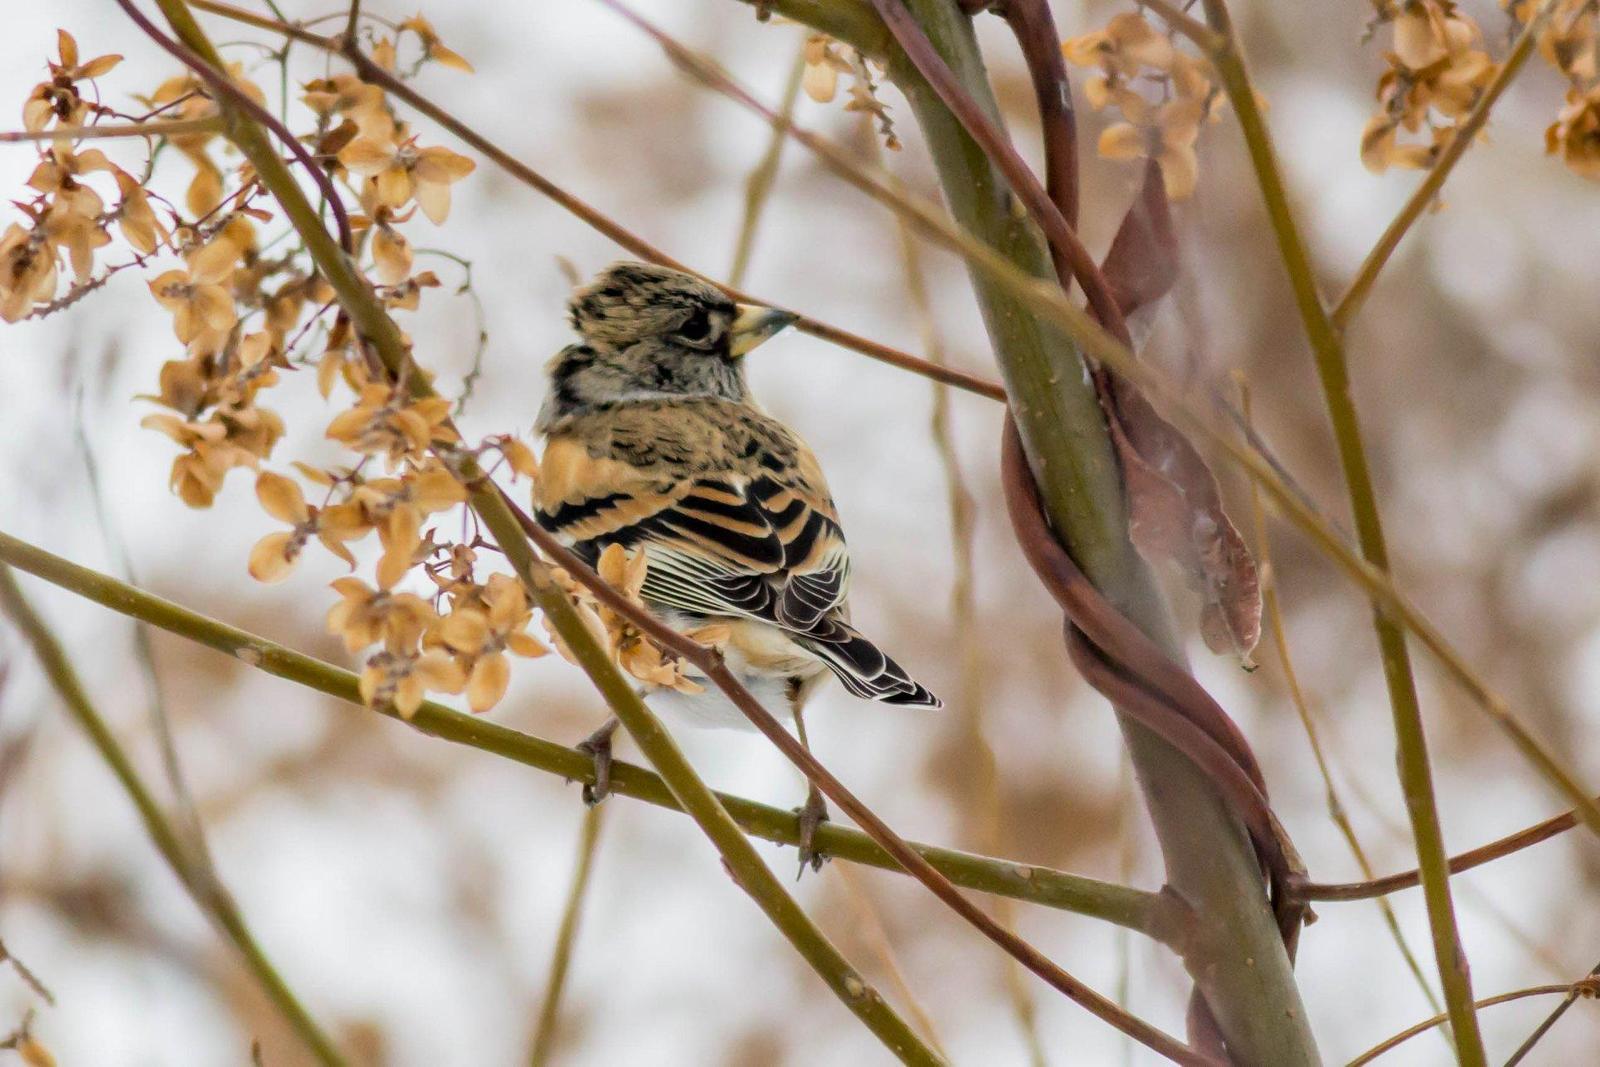 Brambling Photo by African Googre